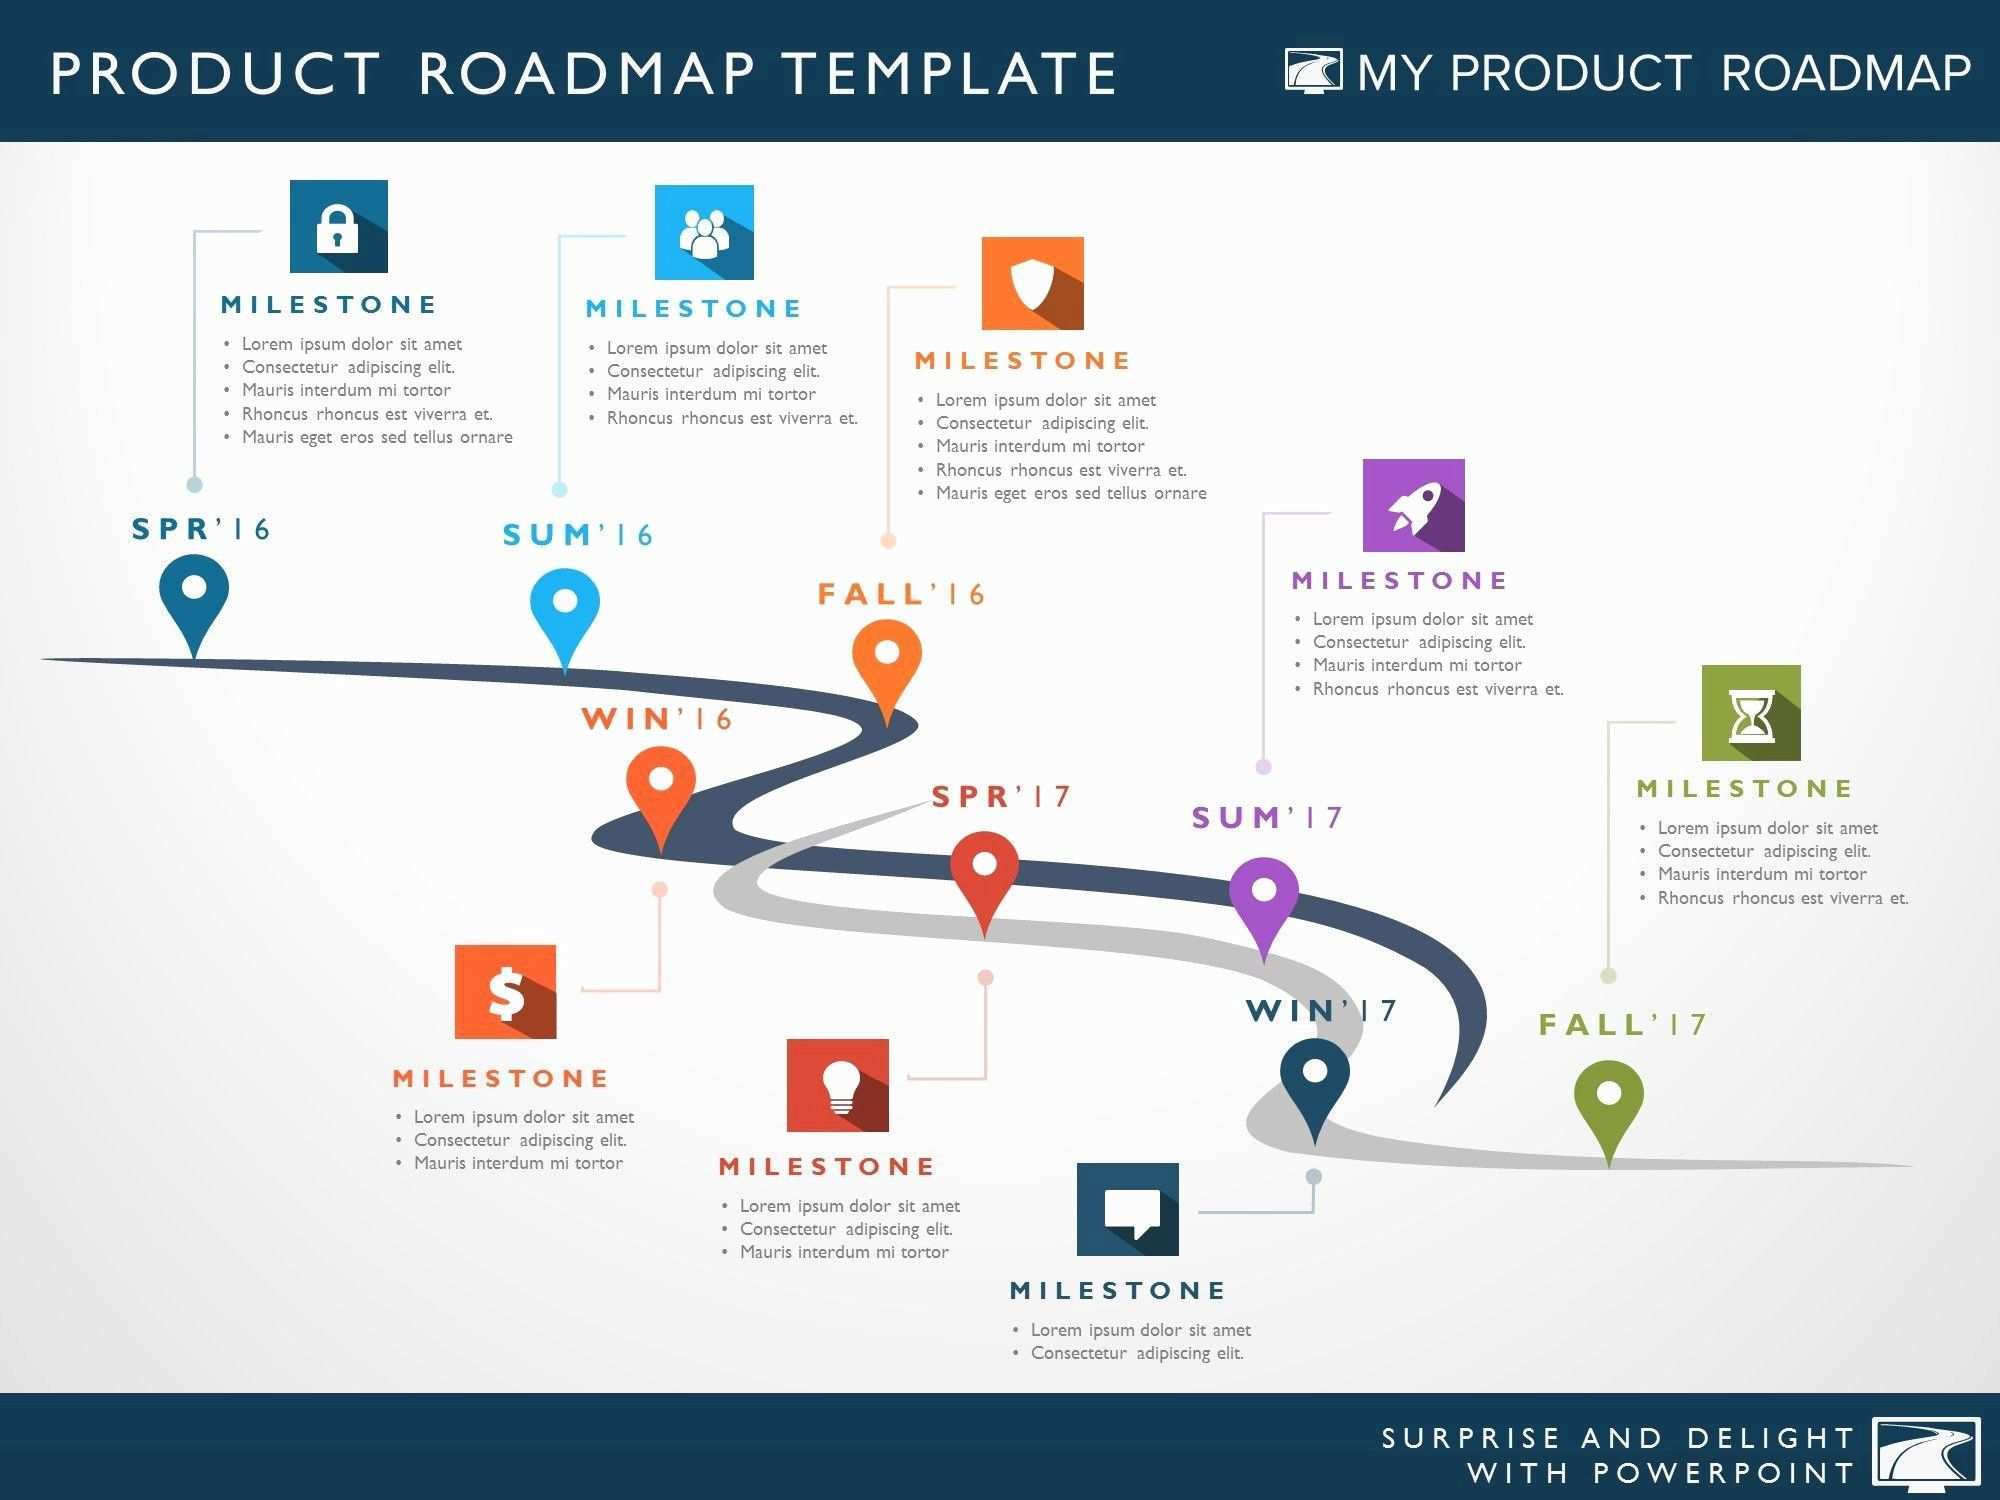 Product Development Plan Template New Eight Phase Software Planning Timeline Roadmap Powerpoint Roadmap Infographic Timeline Design Roadmap